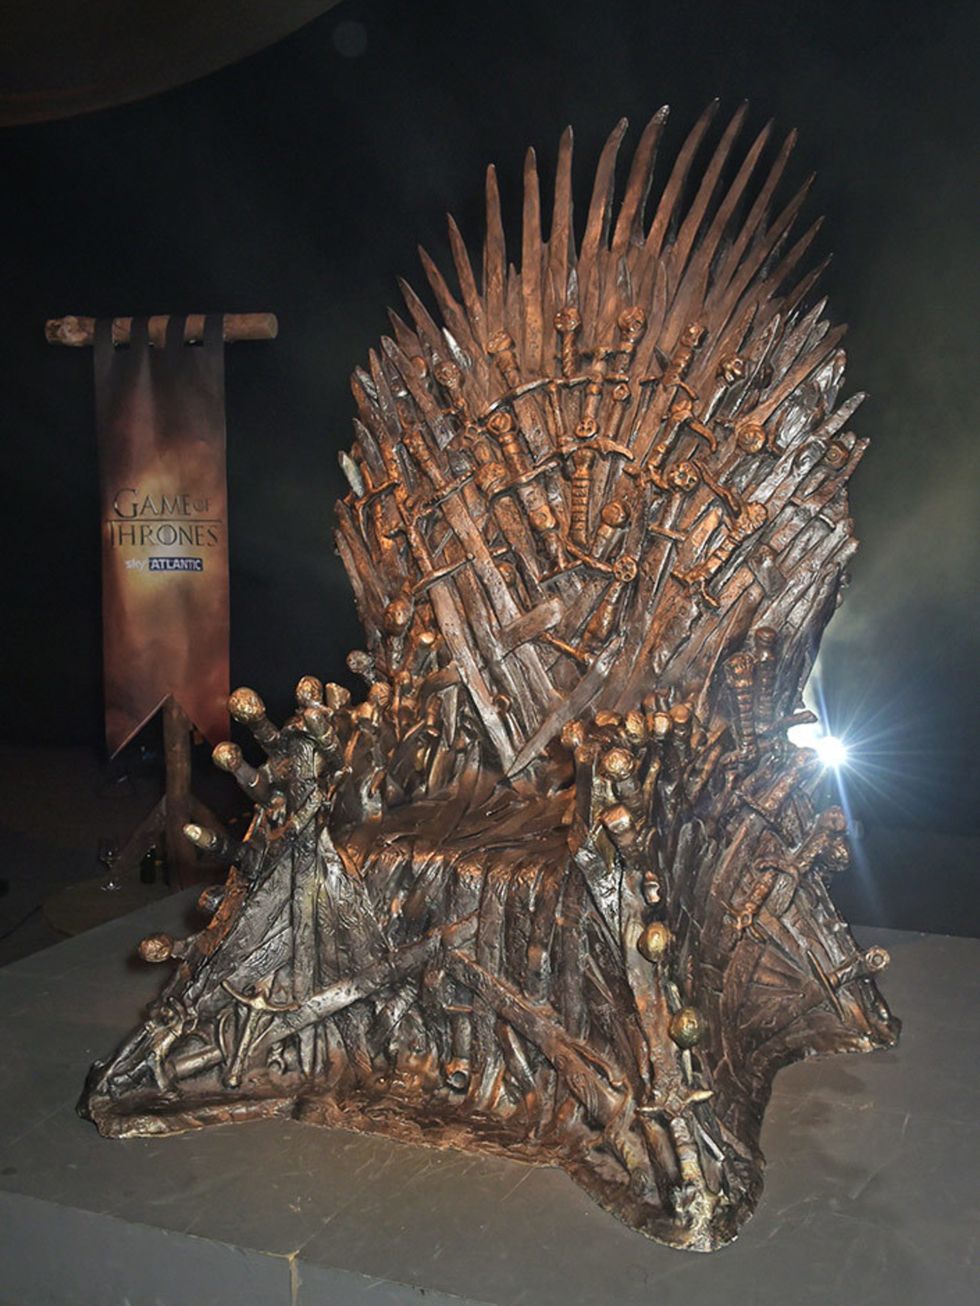 The 'Iron Throne' is shown at the premiere of 'Game of Thrones: Season 5'  at the Tower of London, March 2015.